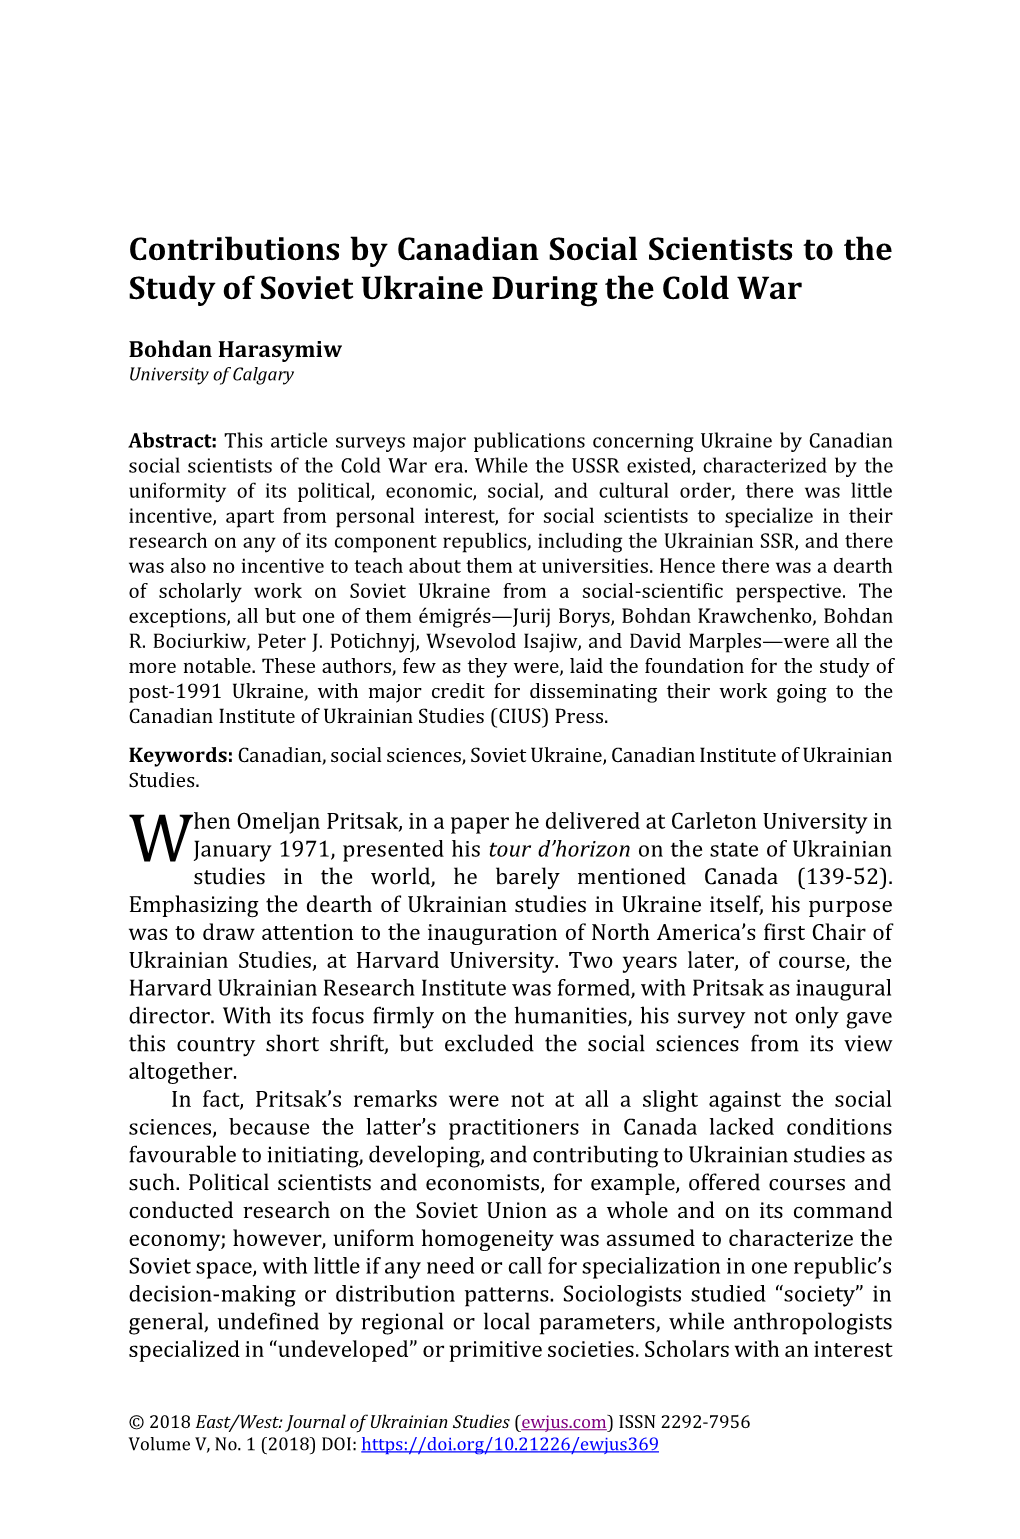 Contributions by Canadian Social Scientists to the Study of Soviet Ukraine During the Cold War